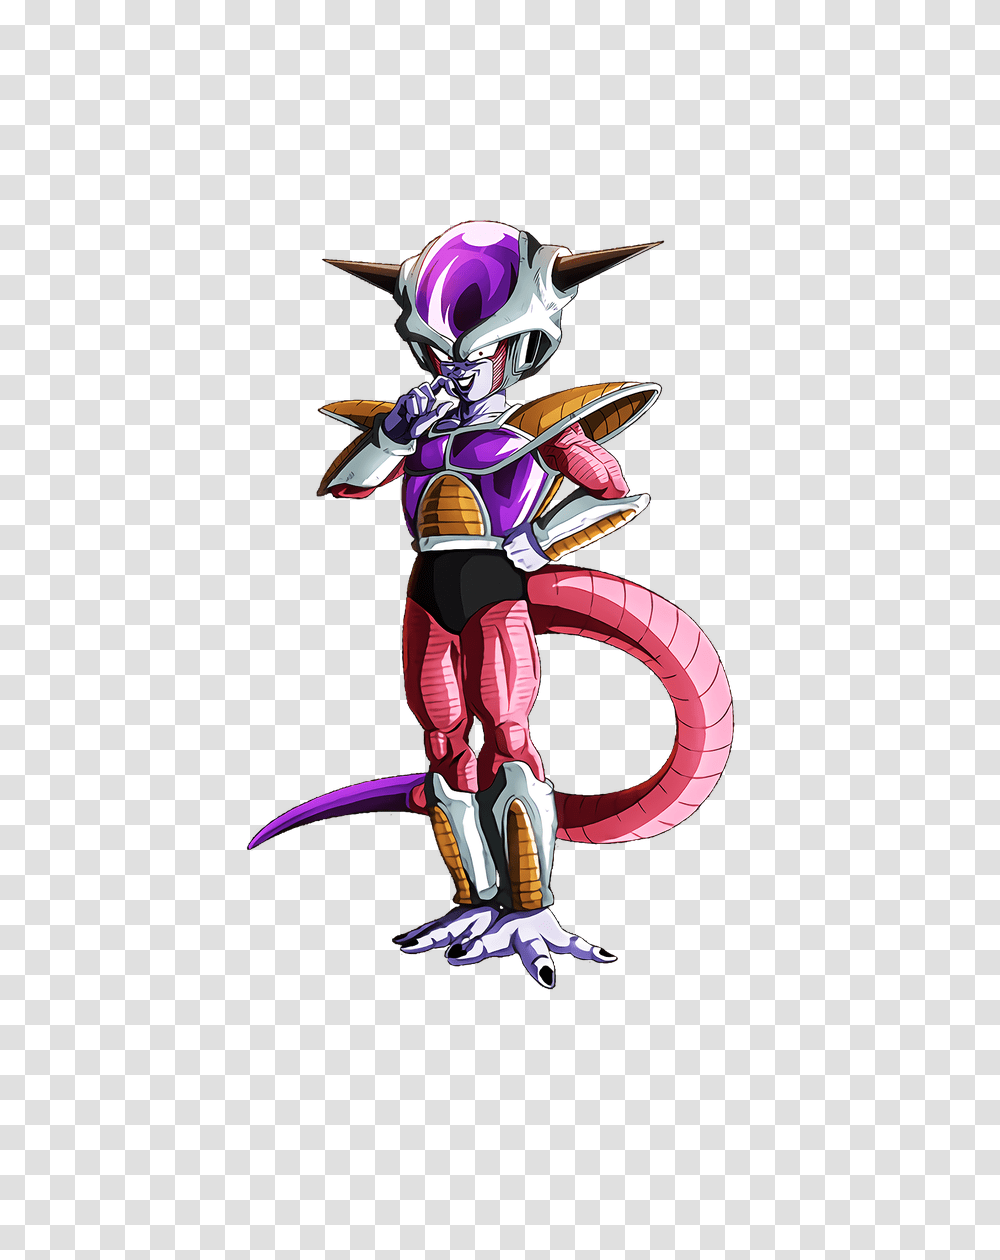 Hydros Dokkanart On Twitter New Transformation Frieza Tur, Costume, Person, Poster Transparent Png